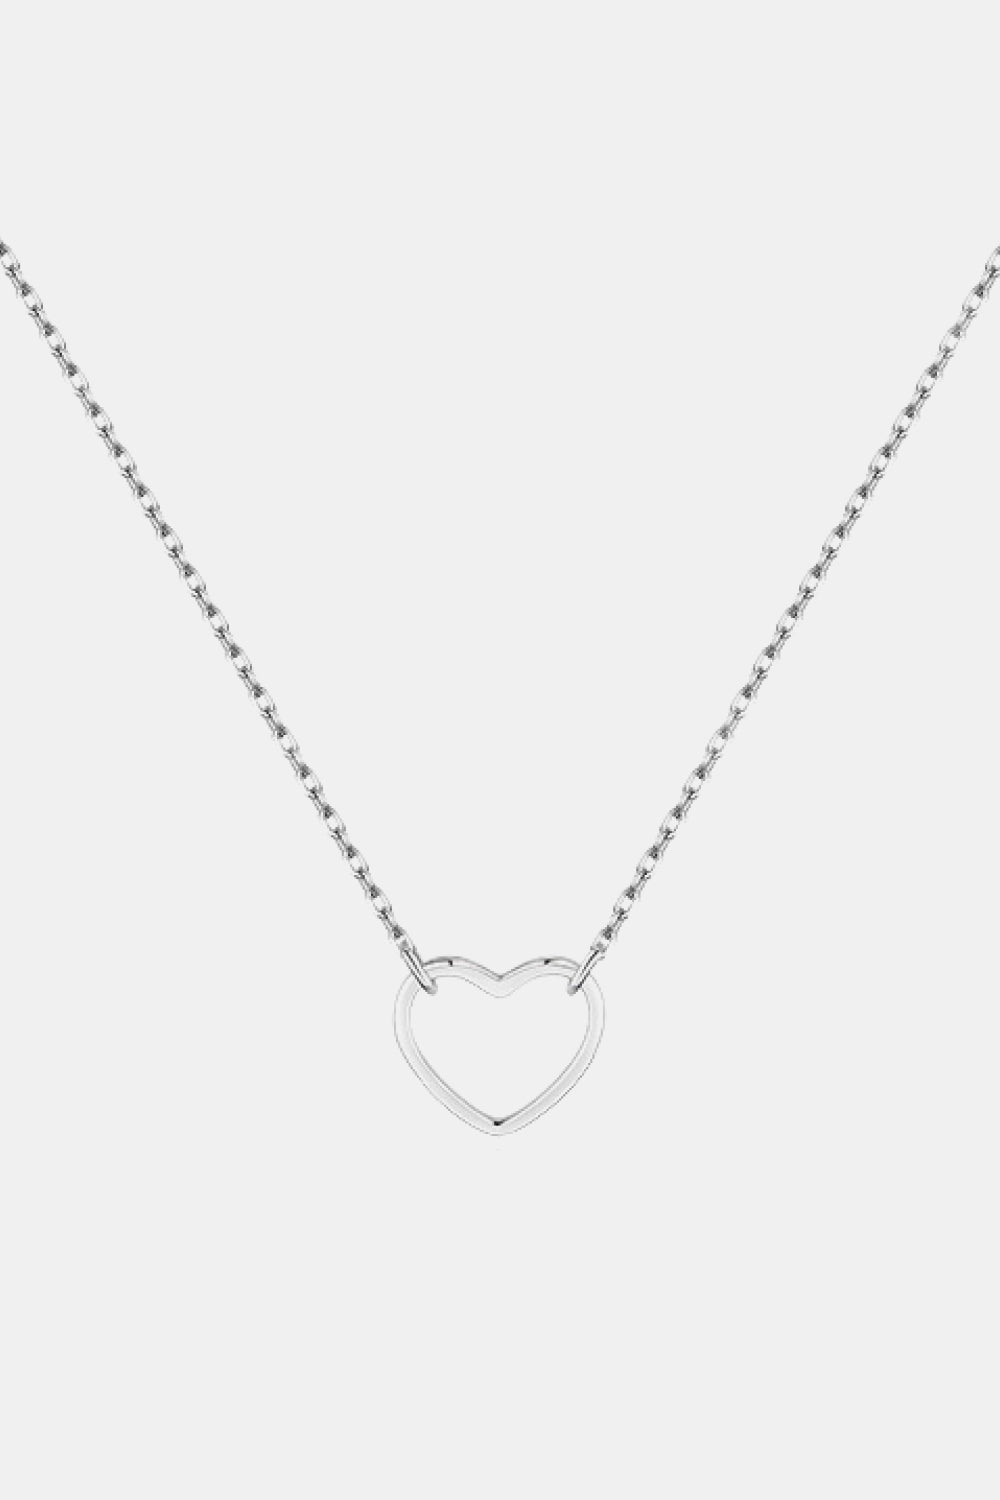 Trendsi Cupid Beauty Supplies Silver / One Size Women Necklace 925 Sterling Silver Heart Shape Pendant Necklace